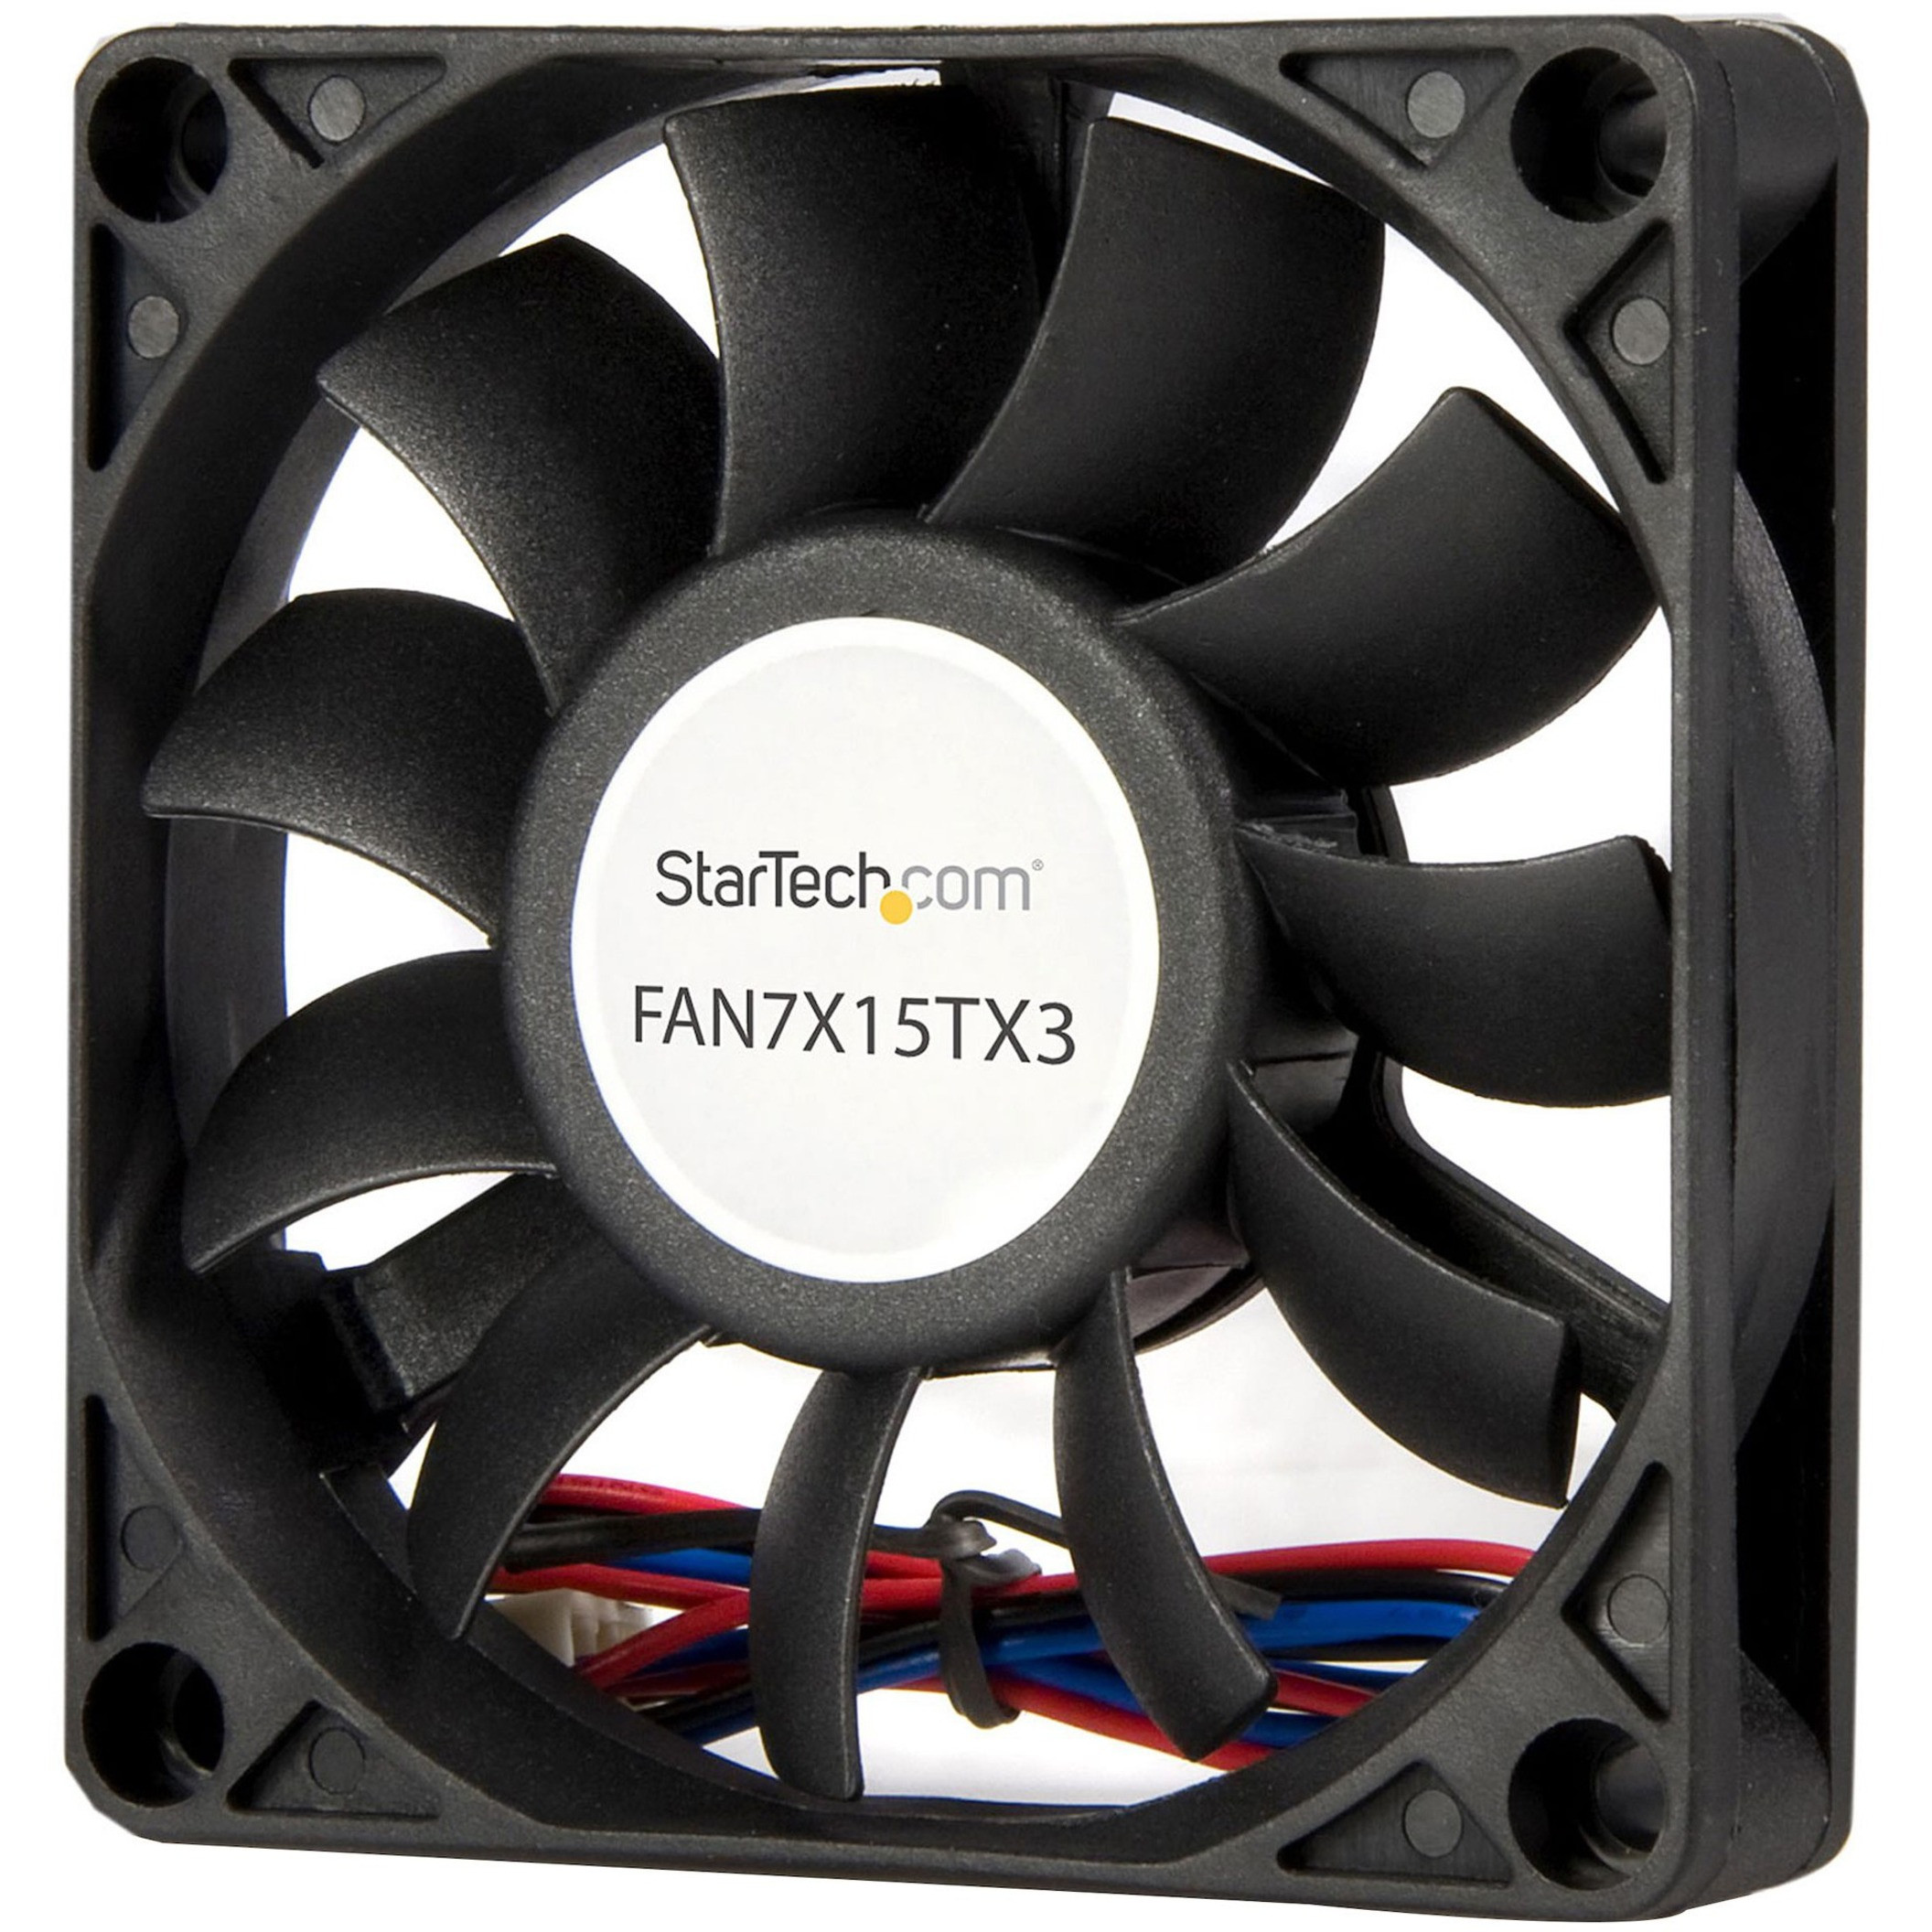 Substantially Feed on phantom Startech .com Replacement 70mm Ball Bearing CPU Case FanTX3 ConnectorCase  fan70 mmblackAdd additional chassis cooling with a 70... FAN7X15TX3 -  Corporate Armor